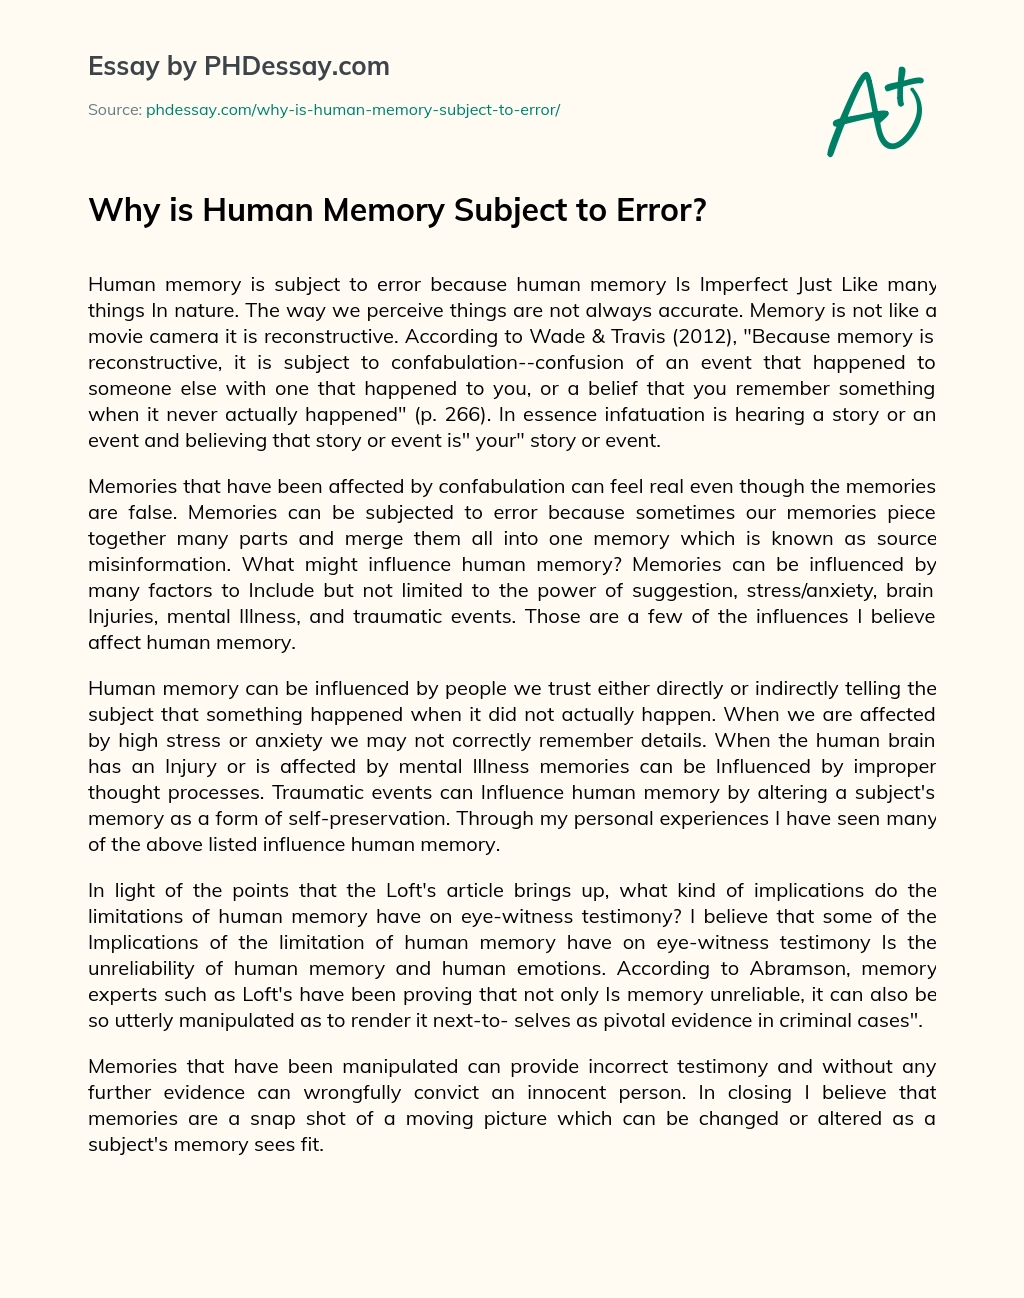 Why is Human Memory Subject to Error? essay